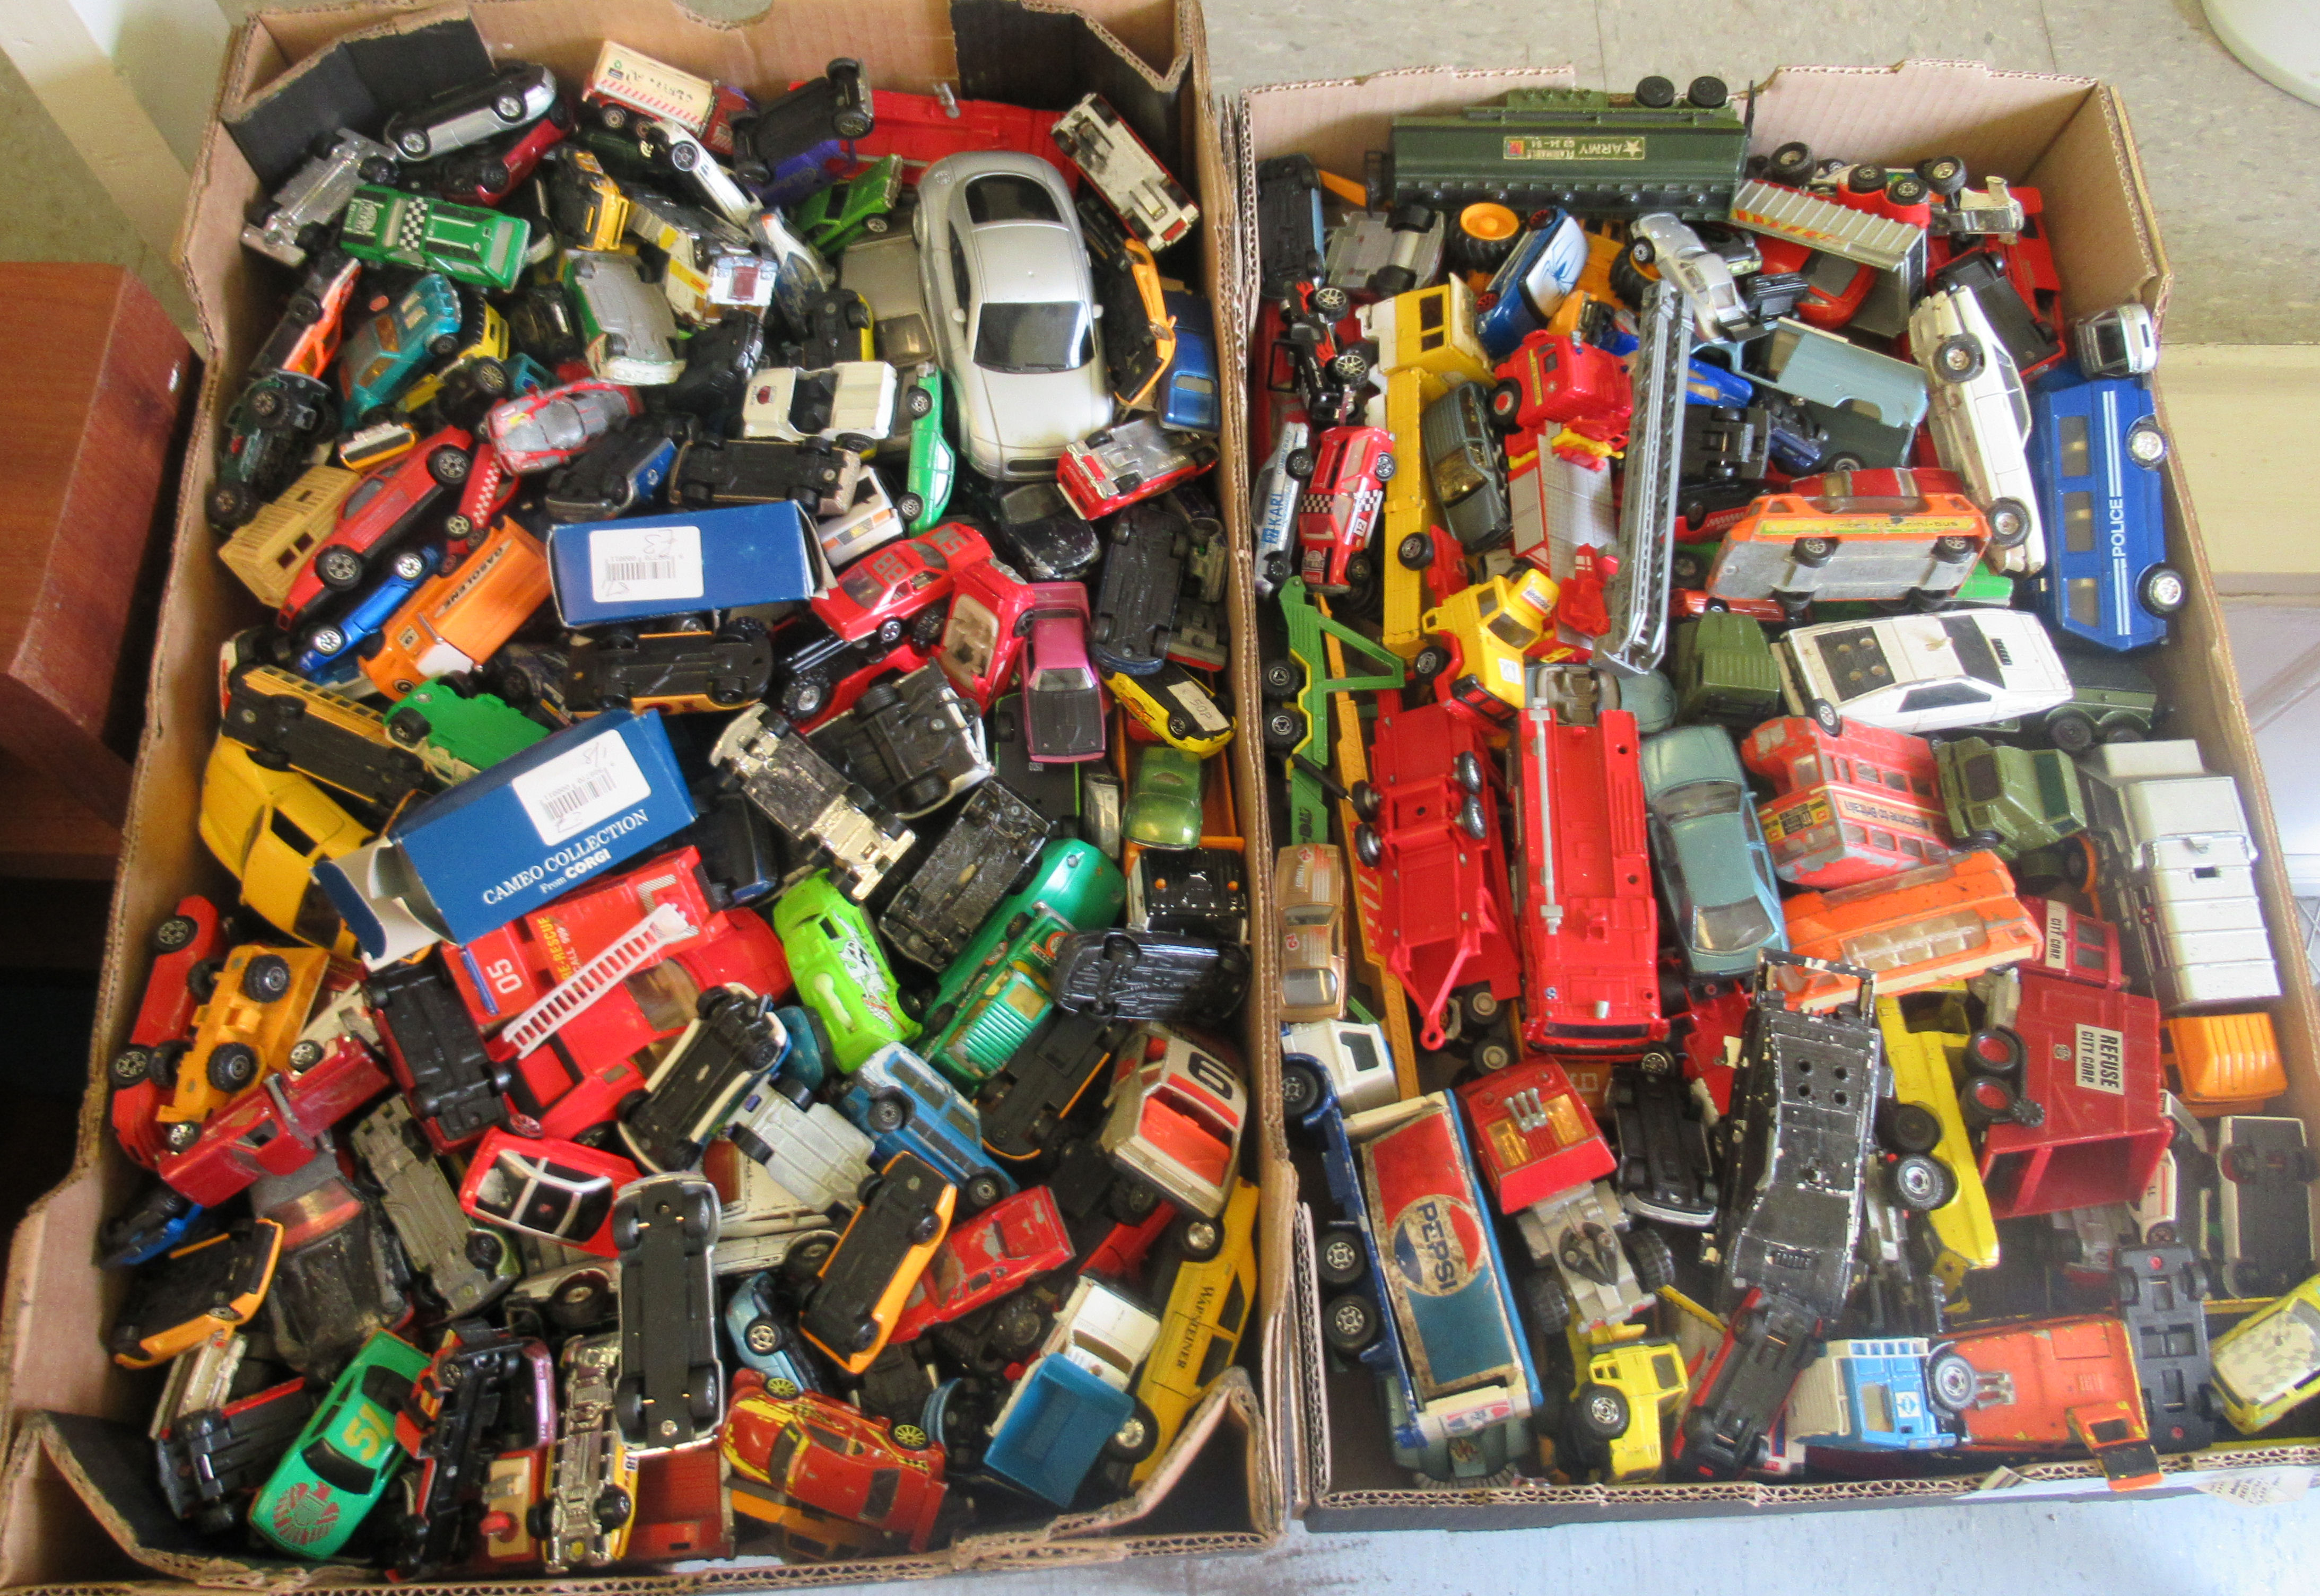 Uncollated diecast model vehicles: to include sports cars, emergency services and convertibles